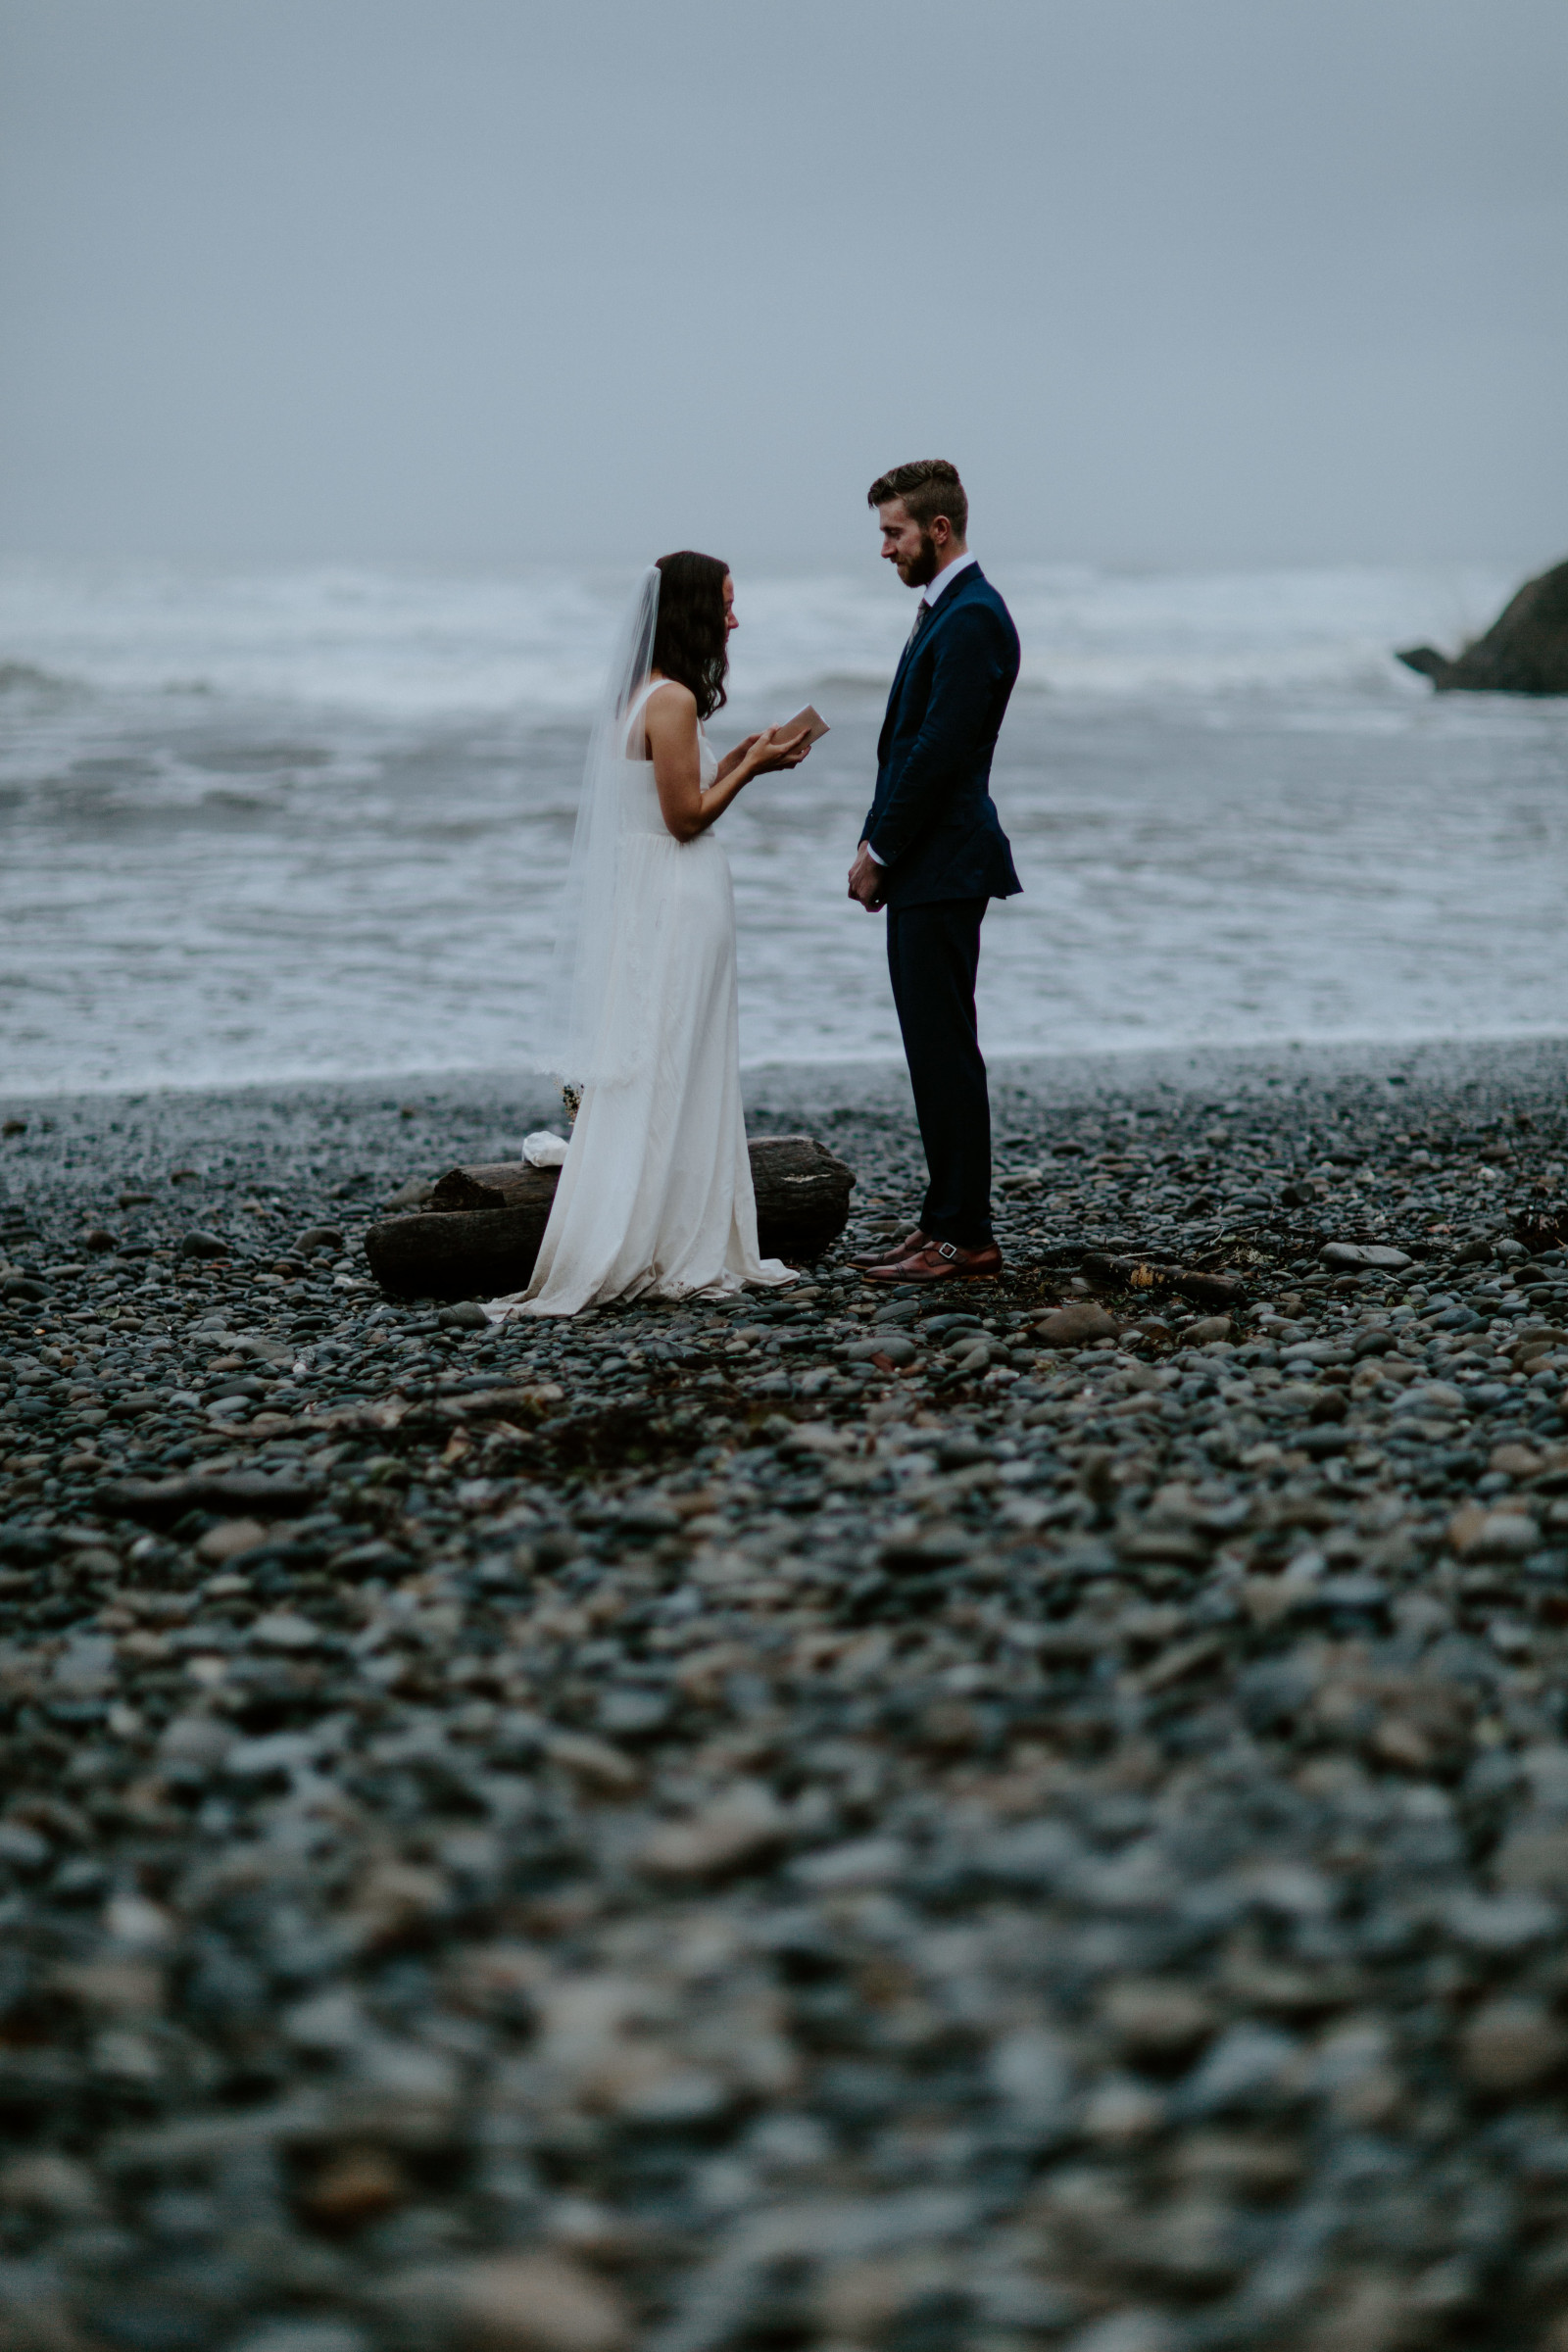 Corey and Mollie stand together on the beach during their elopement ceremony. Elopement photography in the Olympic National Park by Sienna Plus Josh.